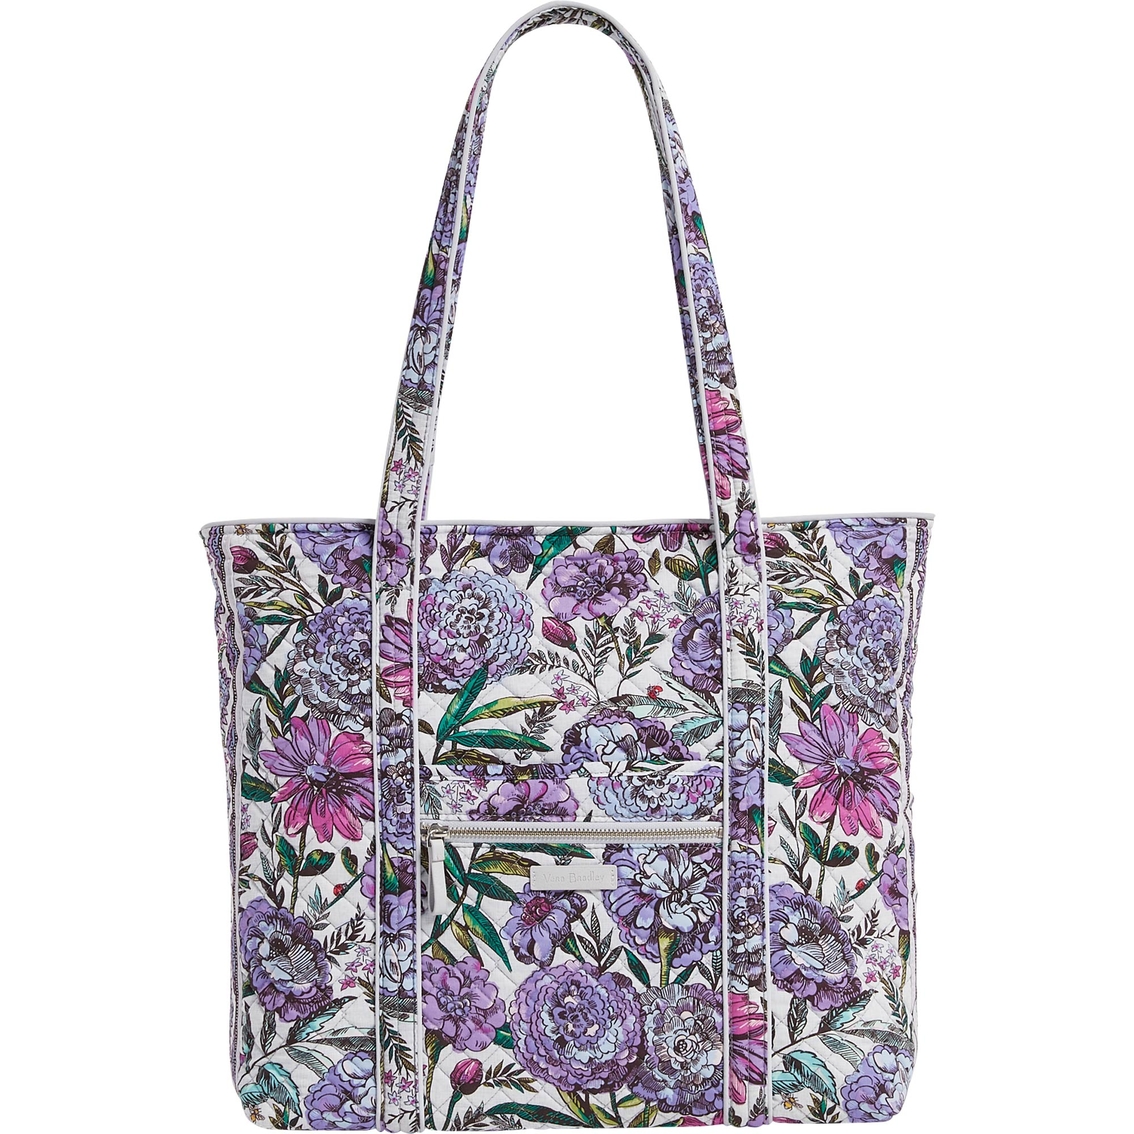 Vera Bradley Large Tote, Lavender Meadow | Totes & Shoppers | Clothing ...